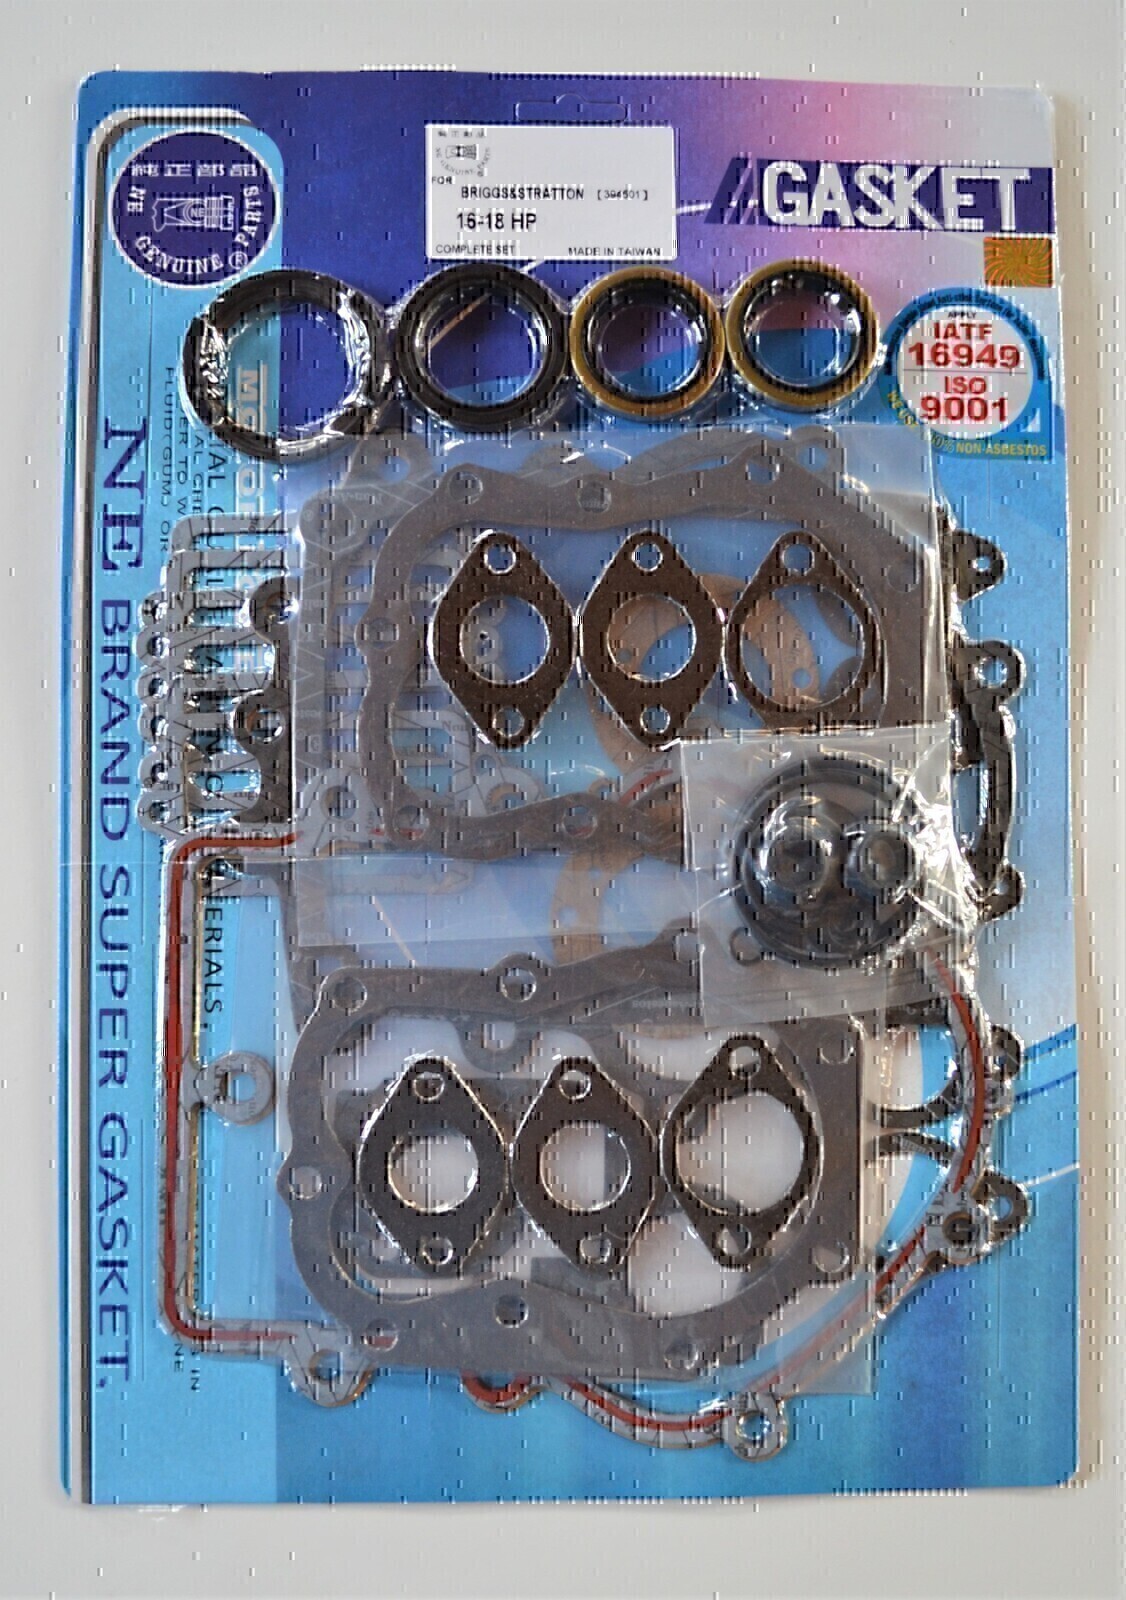 COMPLETE GASKET KIT FOR BRIGGS & STRATTON 16HP 18HP ALL YEARS # 394501